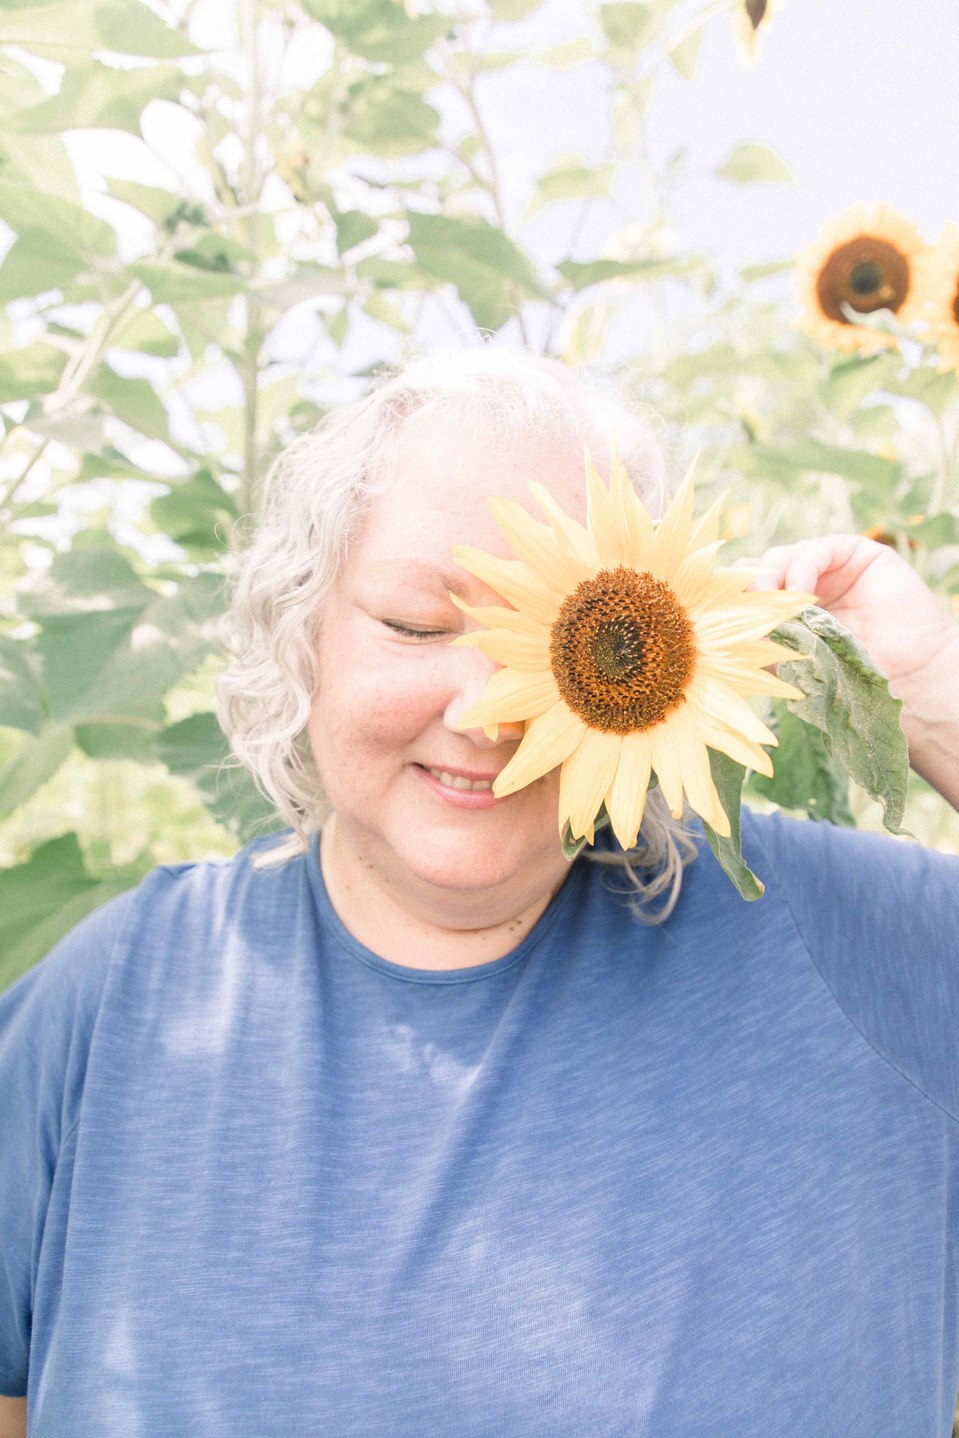 Candid portrait of a woman playing with flowers in a sunflower field, Niagara family photographer, family photography, Niagara portrait photographer, portrait photography, Emily VanderBeek Photography.